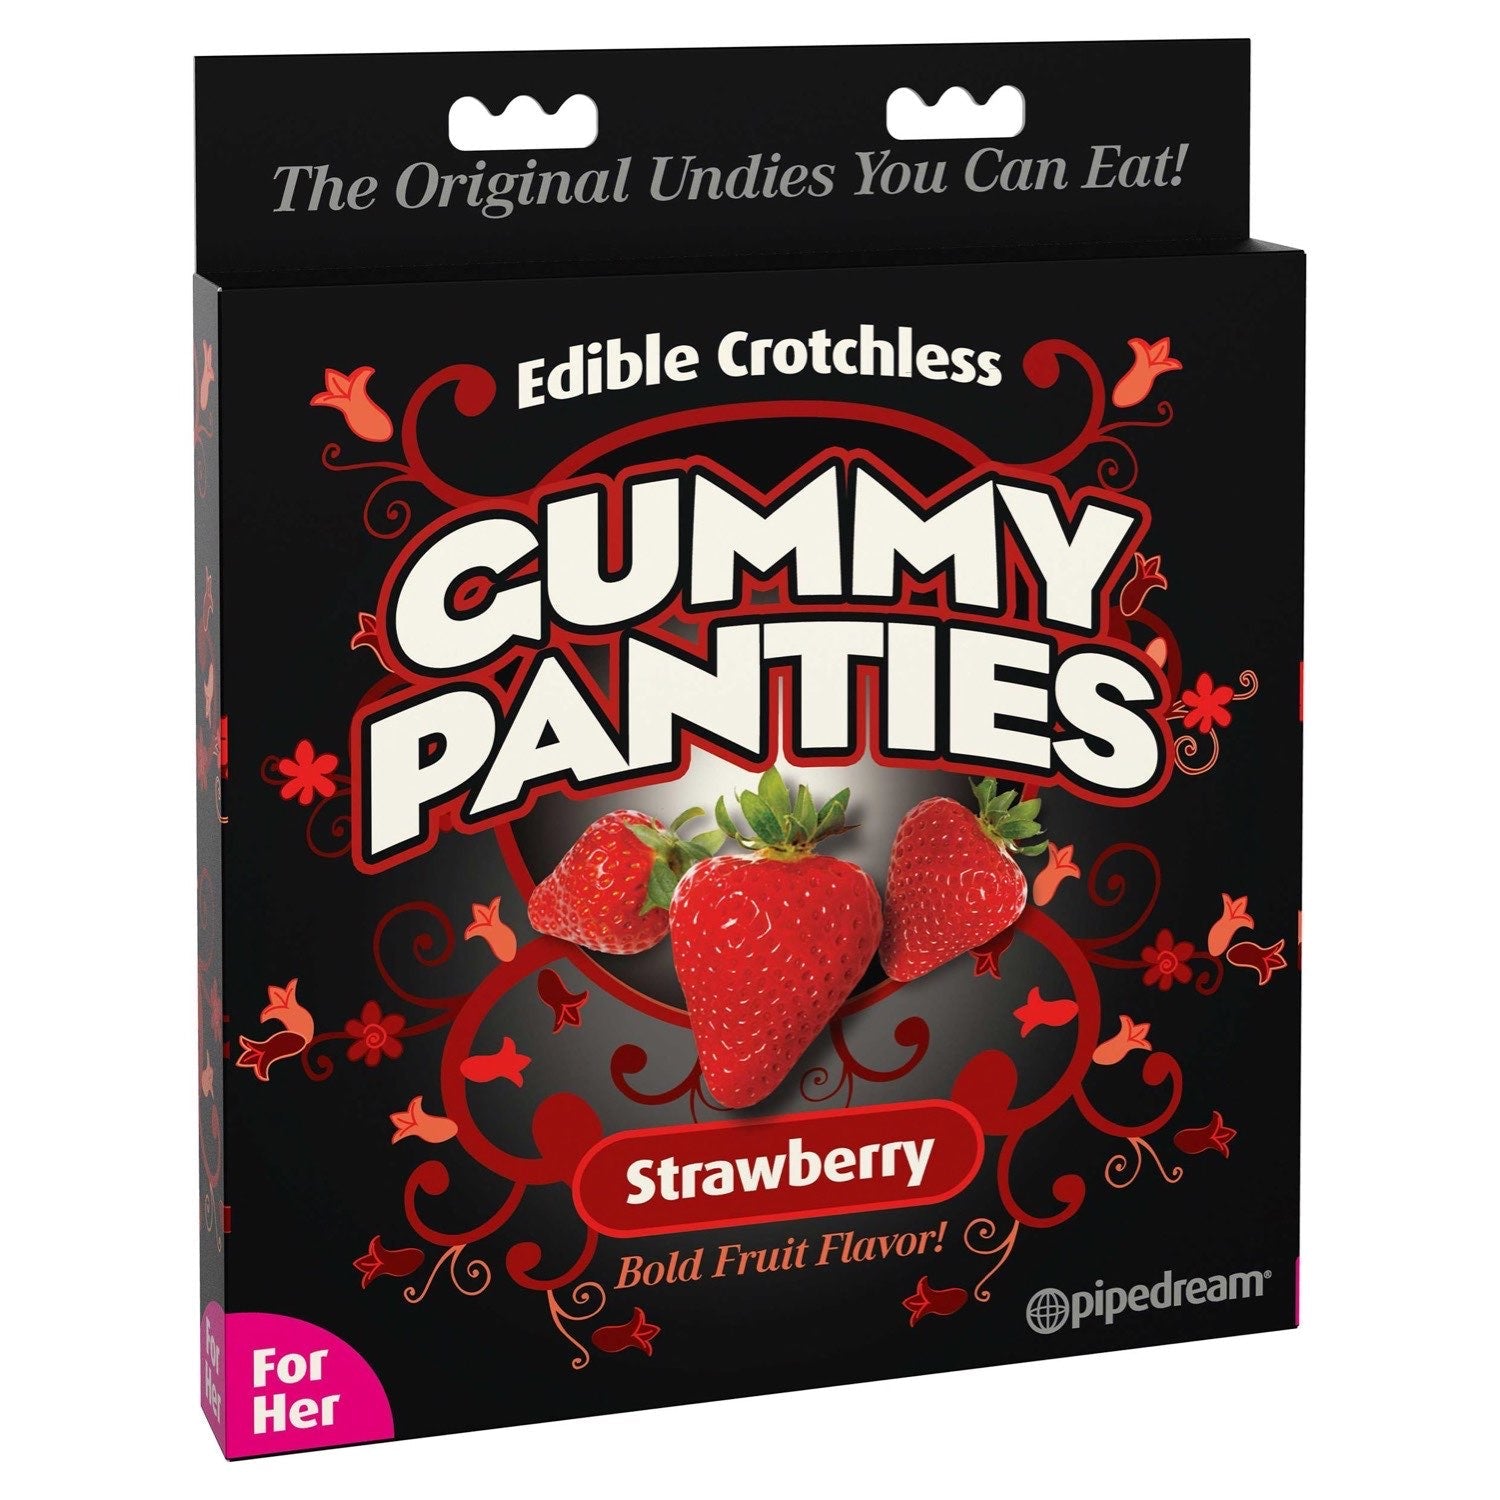  Gummy Panties - Strawberry Flavoured Edible Crotchless Panties by Pipedream